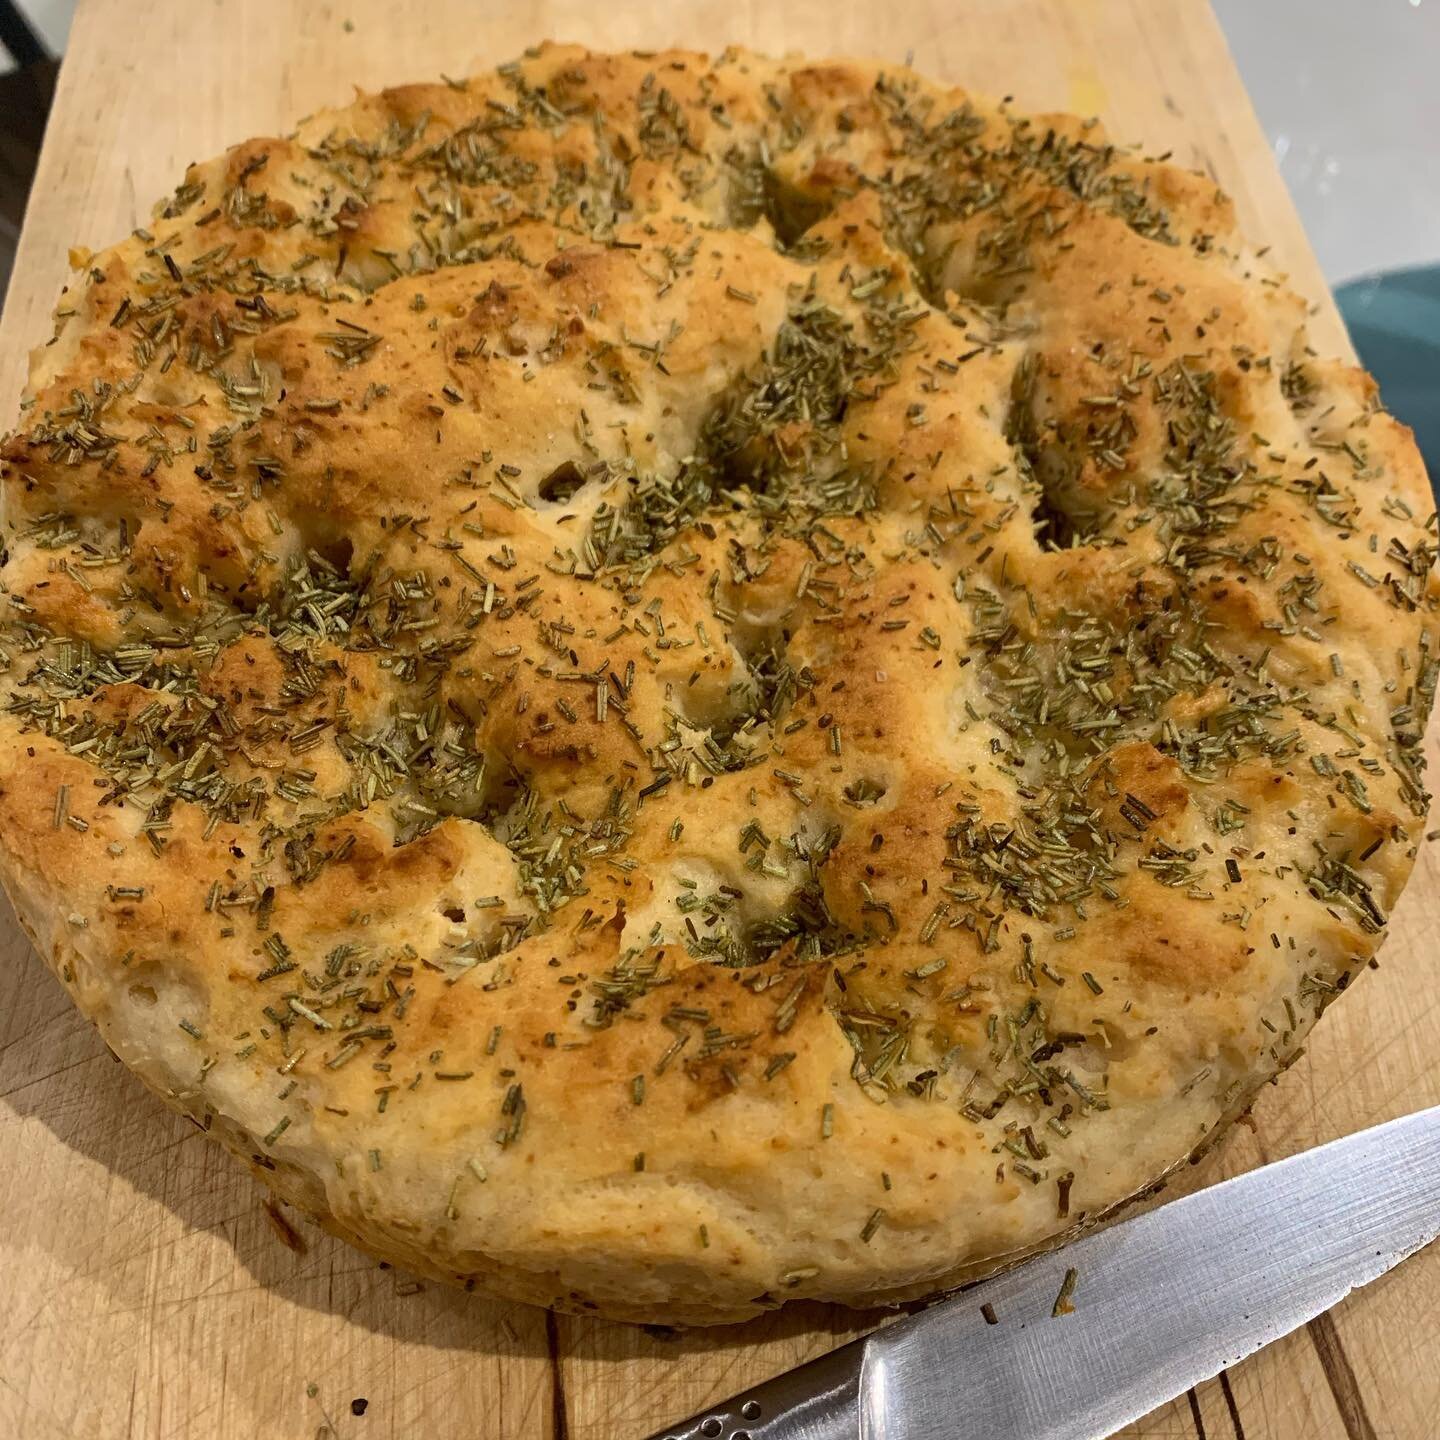 Super simple is just what we need and this focaccia was just that! @davinasteelglutenfree kit made my little ones very happy indeed!! 
On sale @sainsburys.
#glutenfree #glutenfreekids #gf #coeliacdiet #coeliac #coeliackids #coeliacfood #coeliacfamily